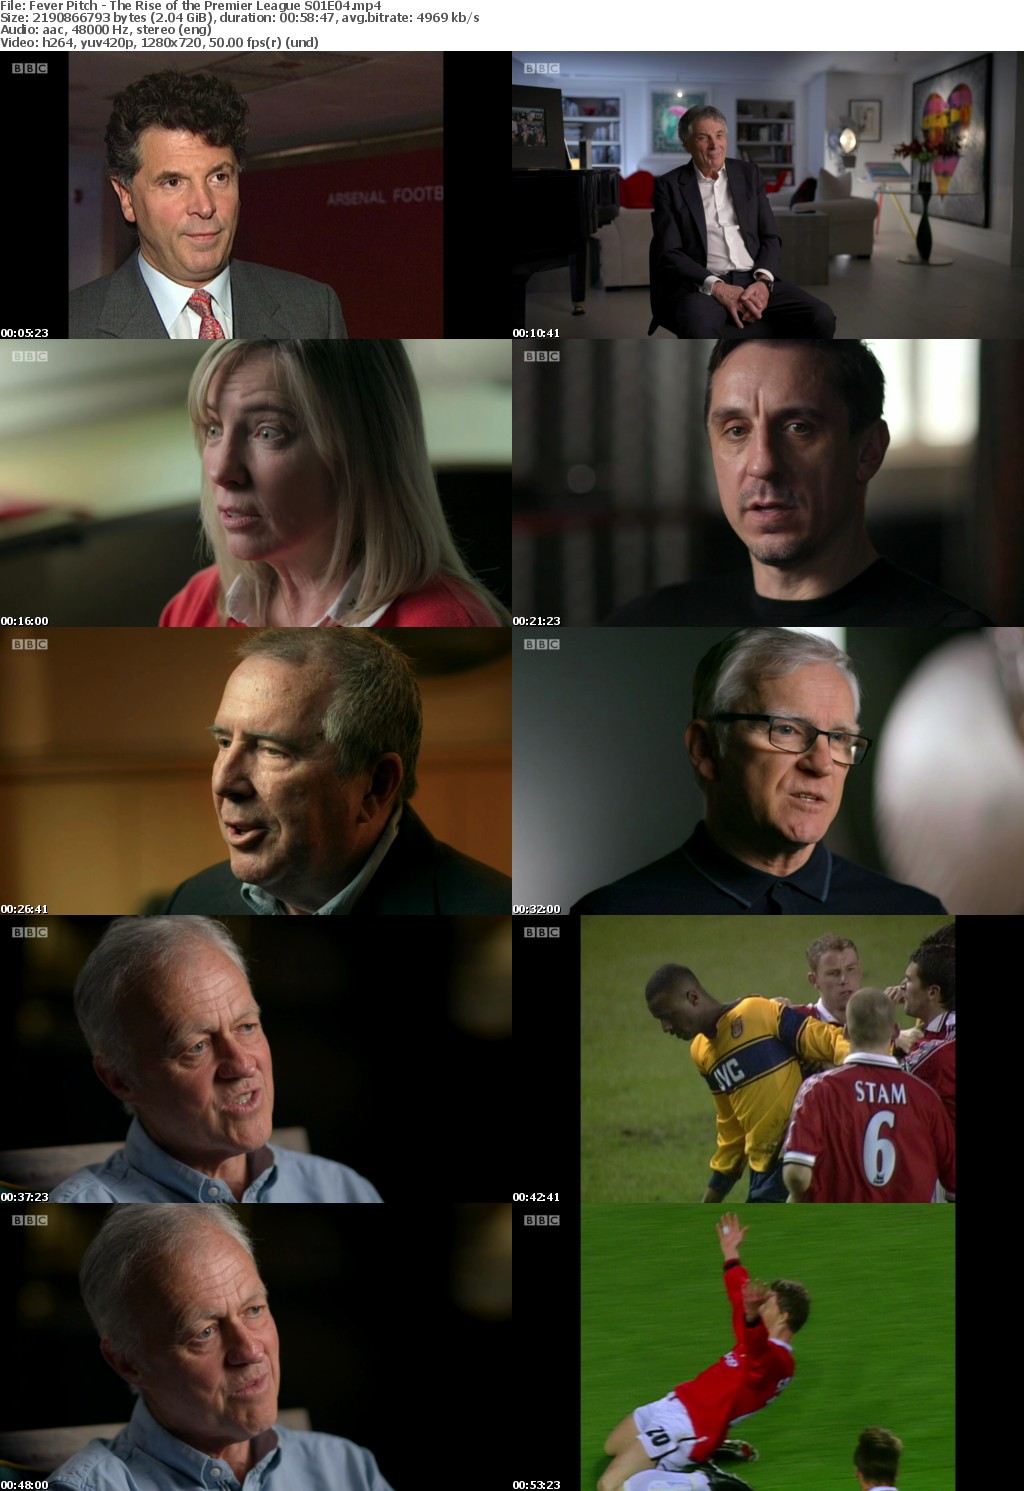 Fever Pitch The Rise of the Premier League S01E04